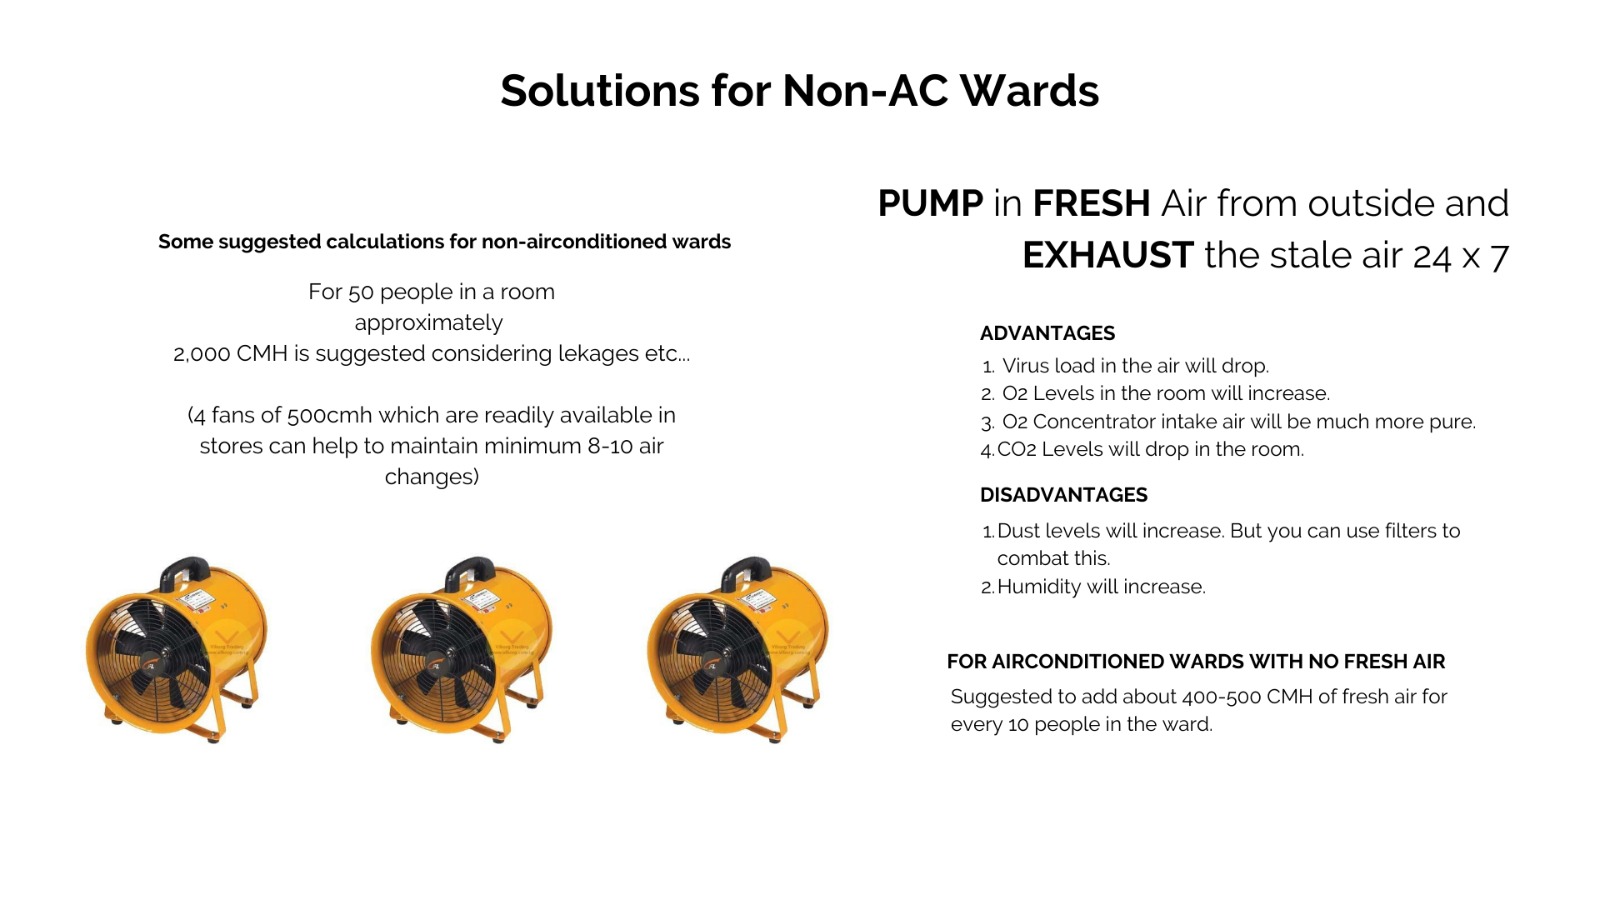 solutions for non-ac wards